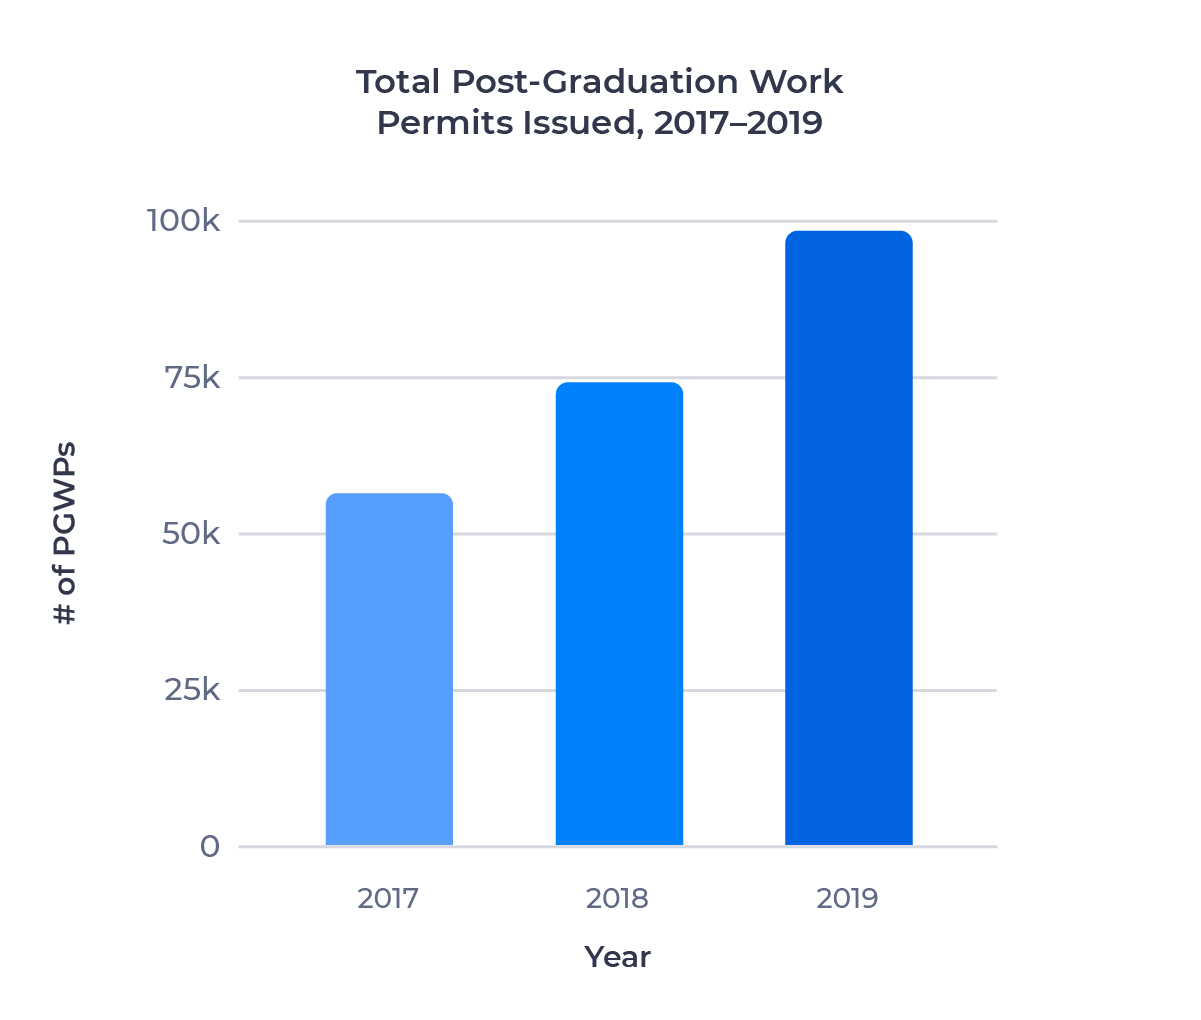 Bar chart showing the number of post-graduation work permits issued between 2017 and 2019. Examined in detail below.